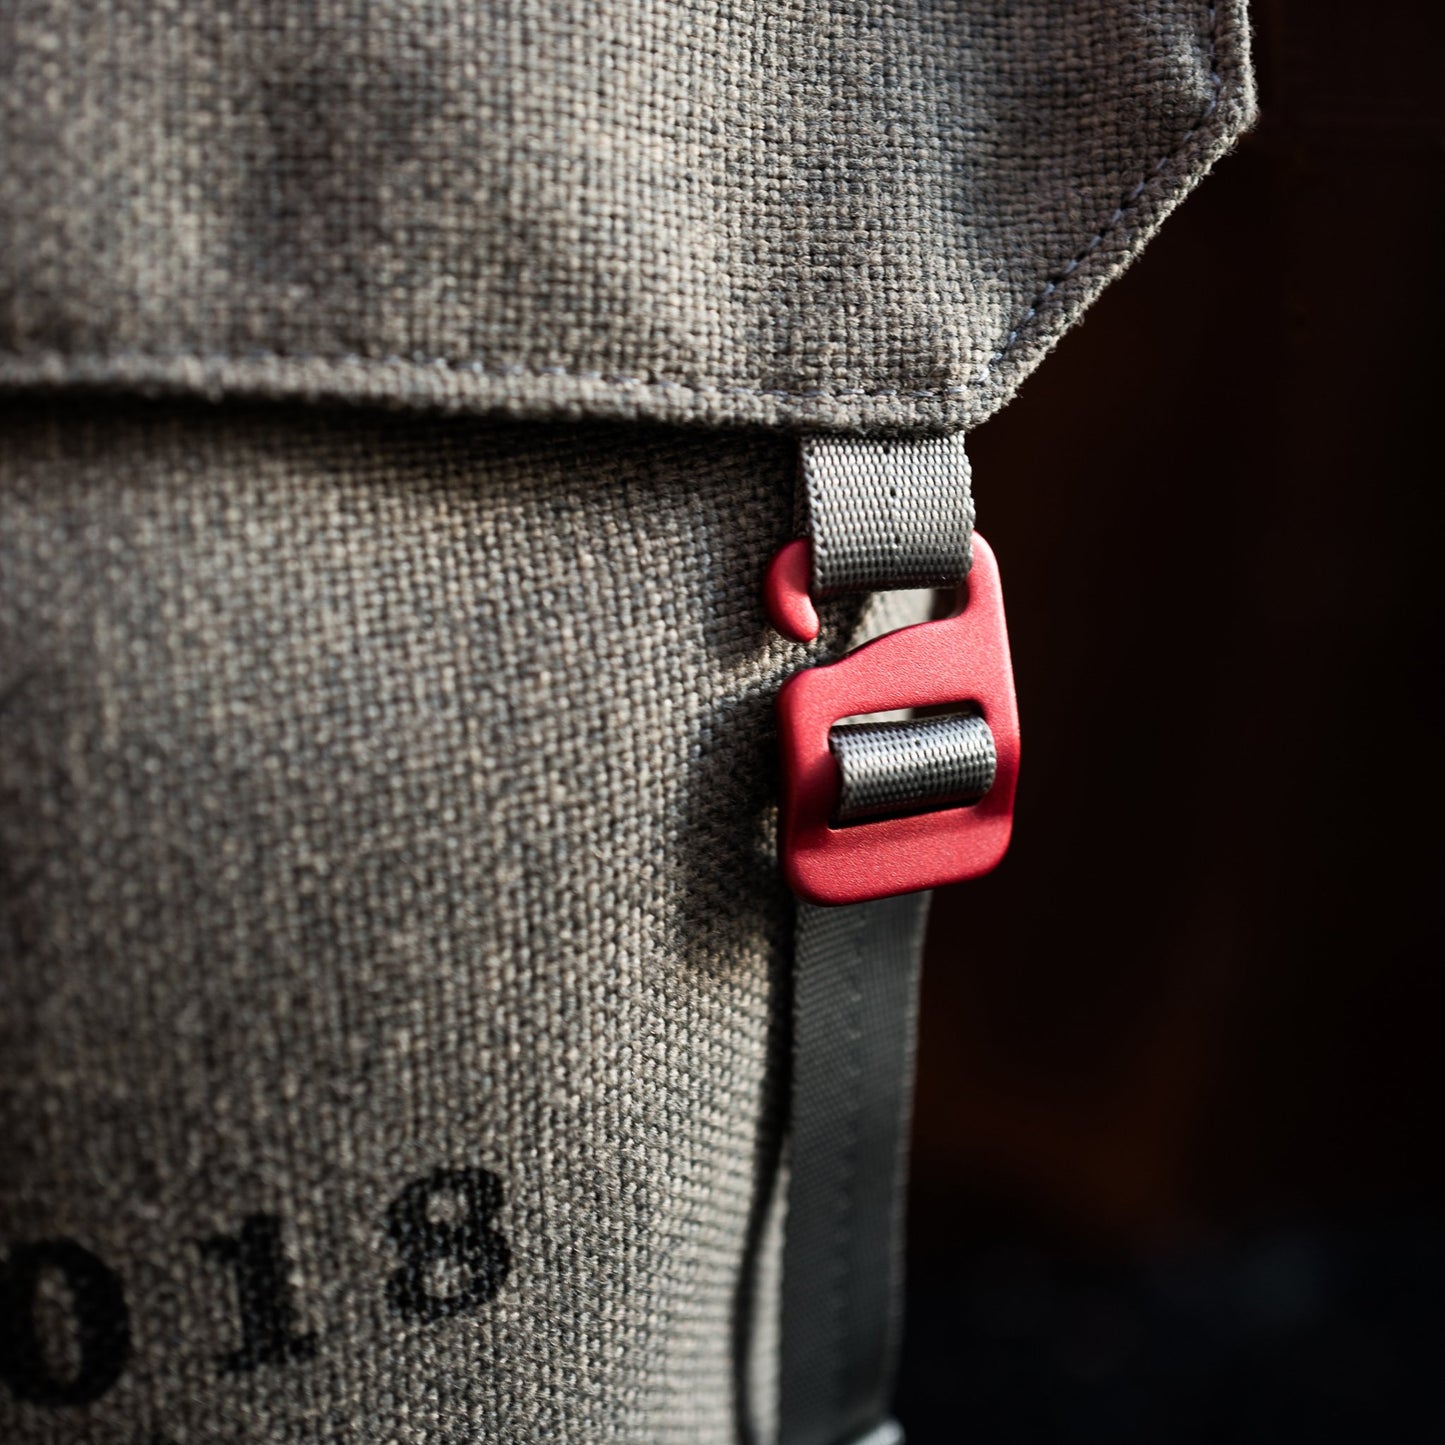 Close-up of red anodized aluminum clip on a Fierce Hazel convertible small messenger bag made with sustainable fabric. Functional, rugged and water-resistant it is military styled but beautiful